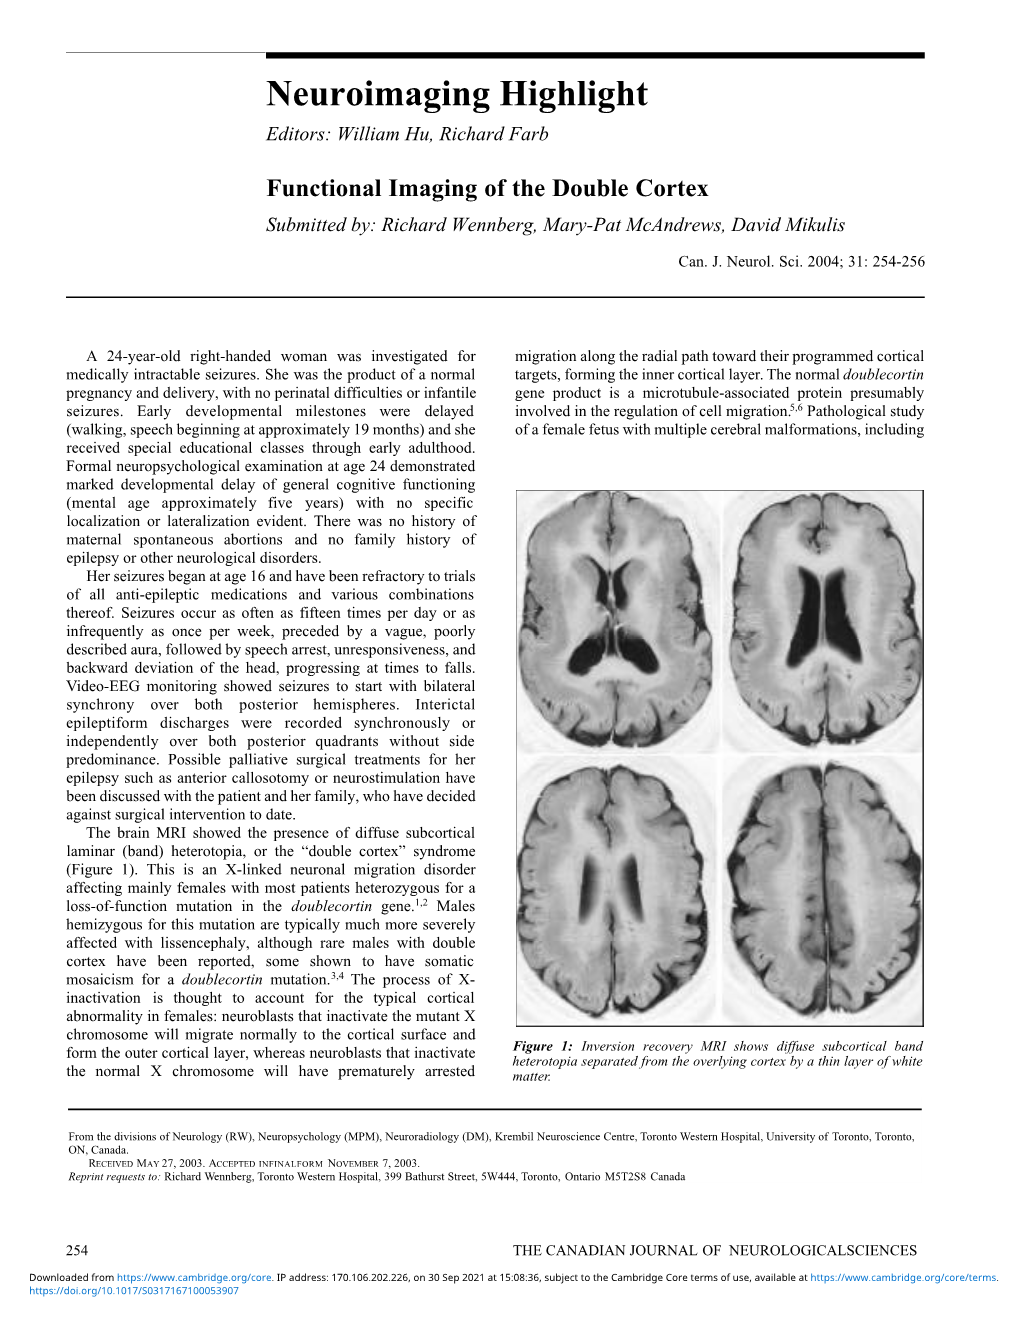 Functional Imaging of the Double Cortex Submitted By: Richard Wennberg, Mary-Pat Mcandrews, David Mikulis